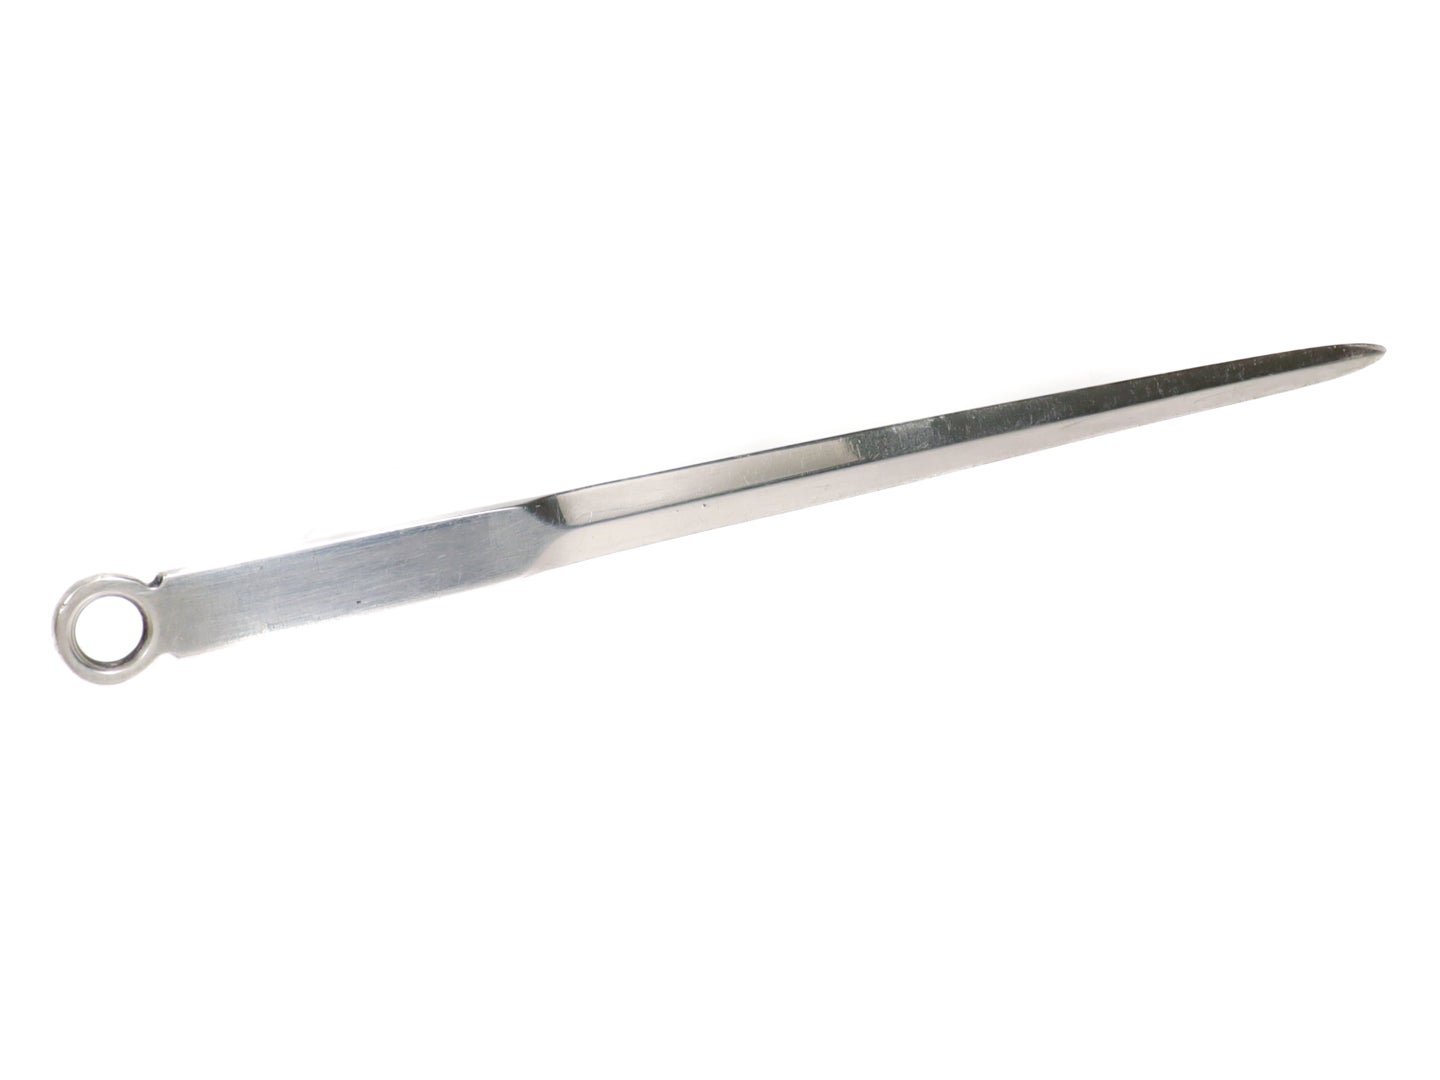 A fine and rare meat skewer that doubles beautifully as a letter opener.

By Tiffany & Co.

In sterling silver.

Marked to the side for Tiffany & Co. / Maker's / Sterling.

Simply wonderful Tiffany design!

Date:
20th Century

Overall Condition:
It